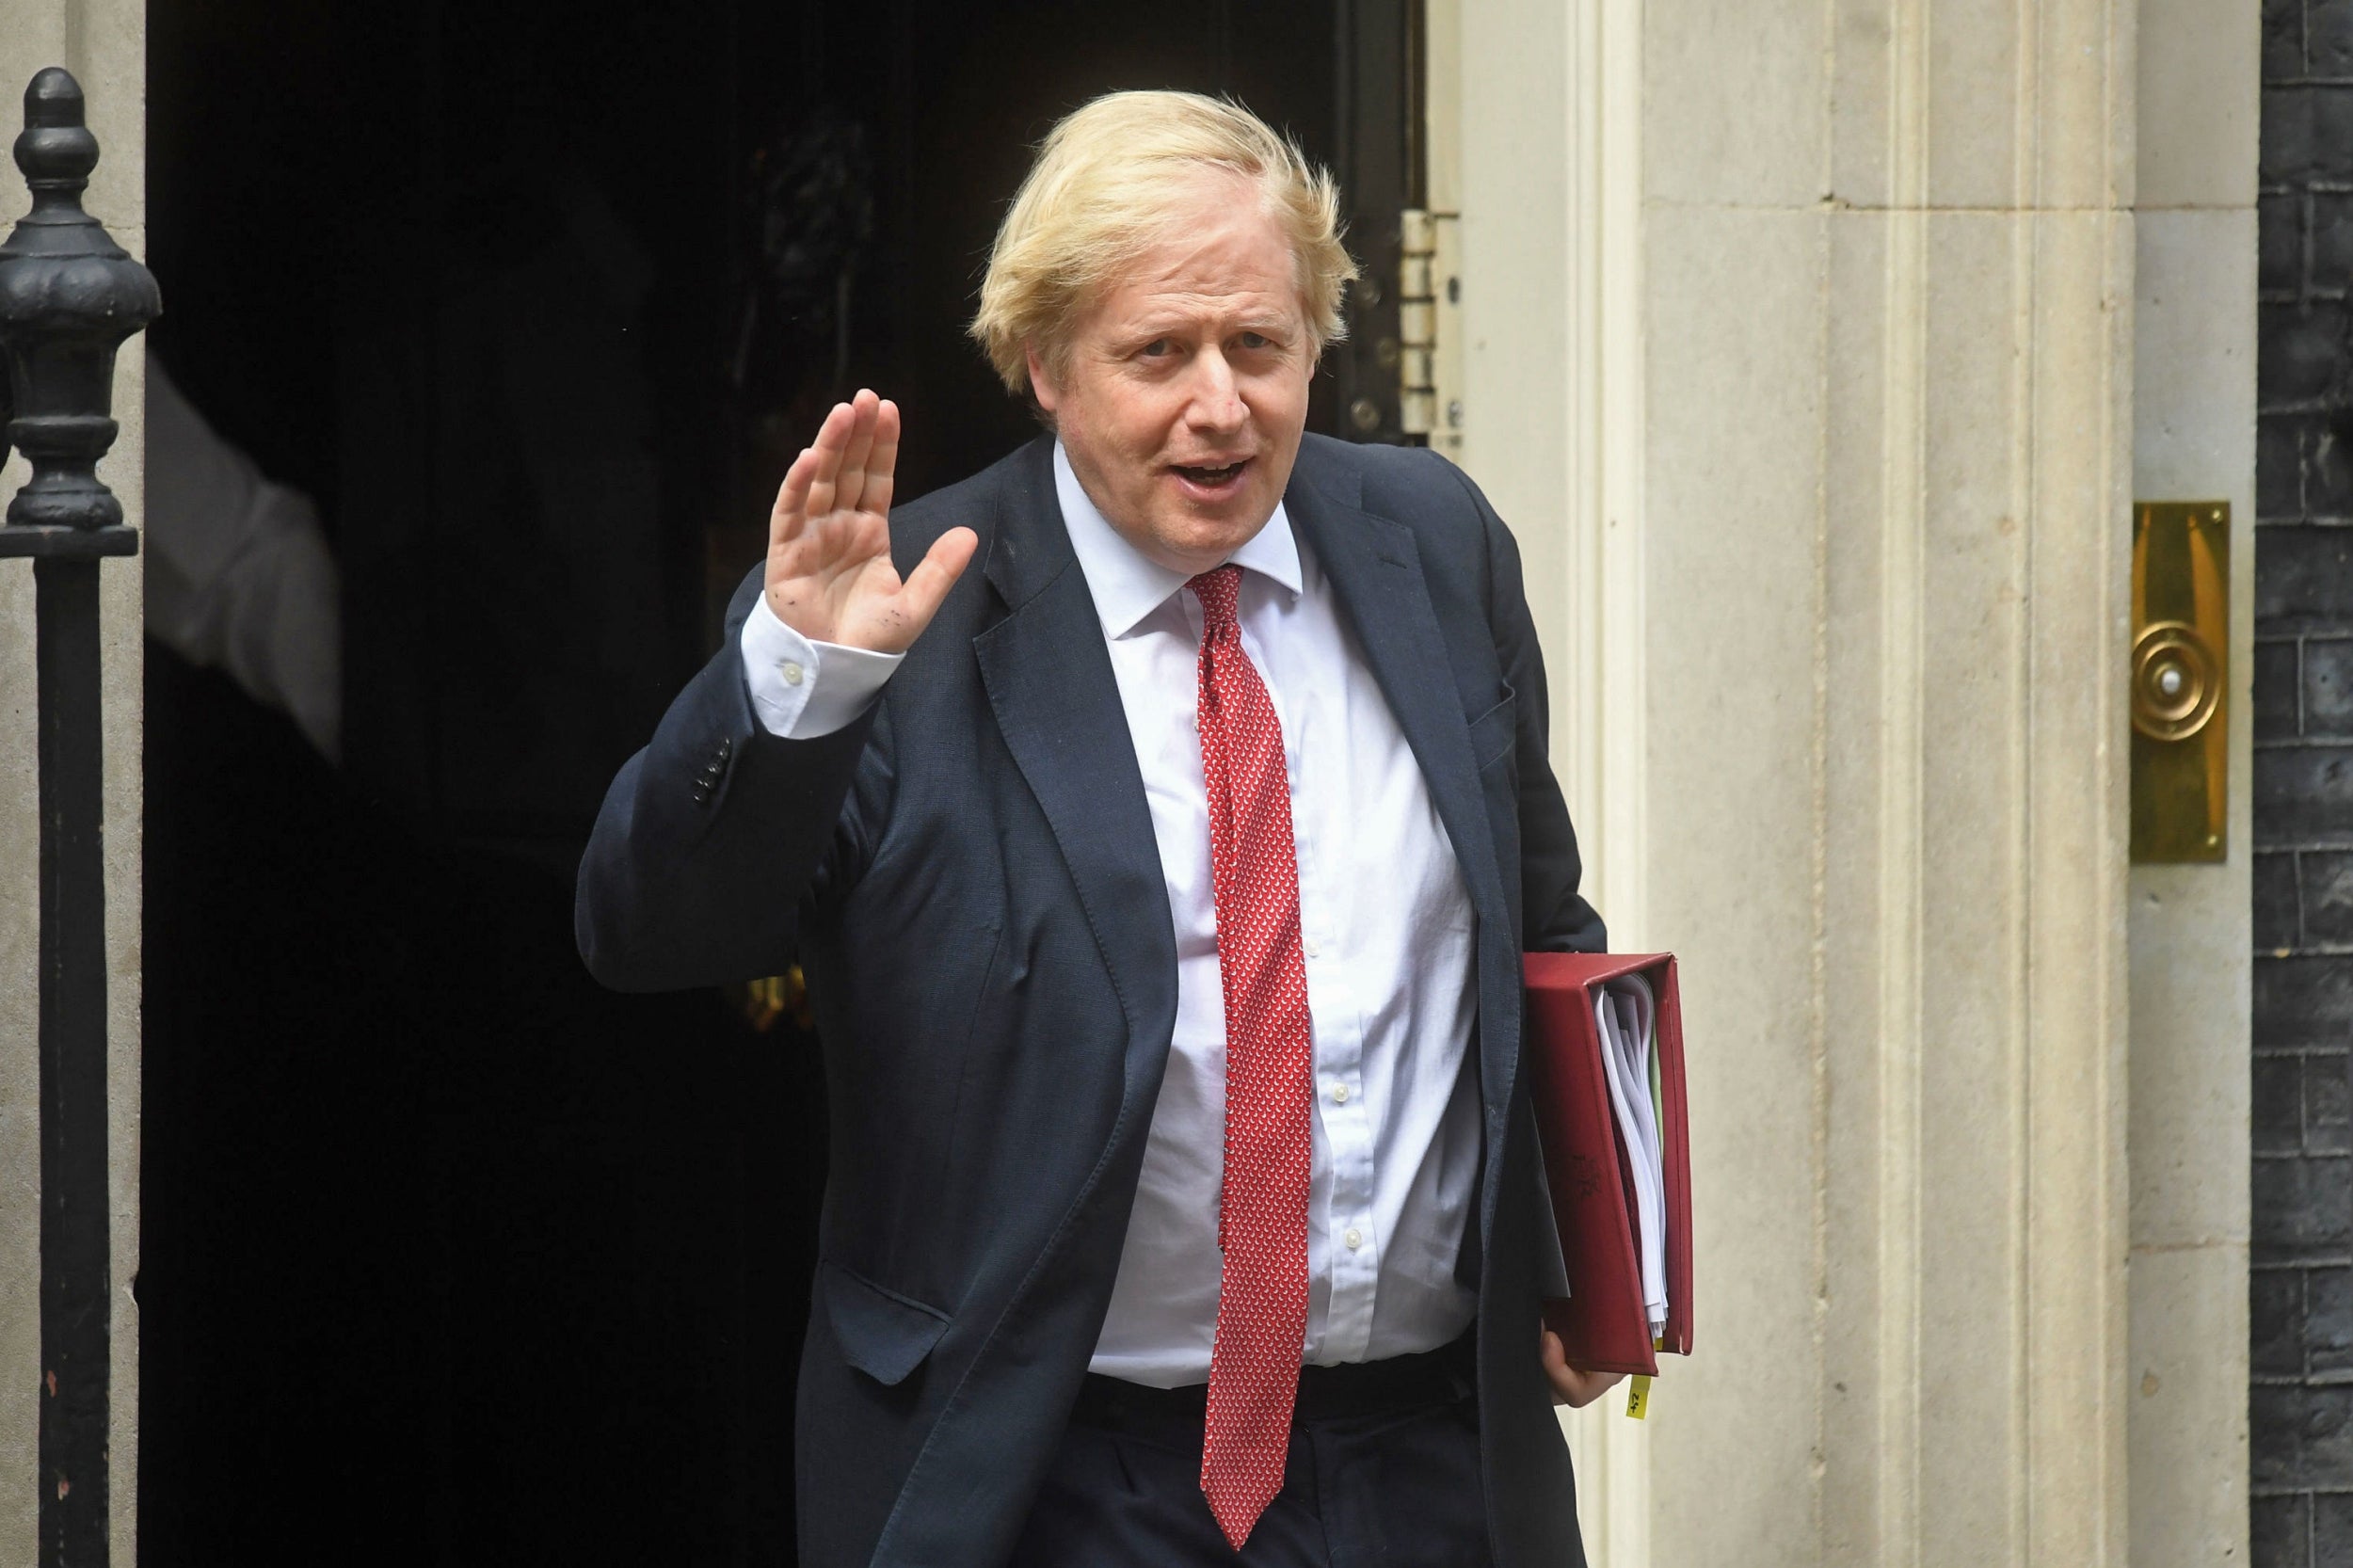 Boris Johnson has been sick and out of action during the pandemic